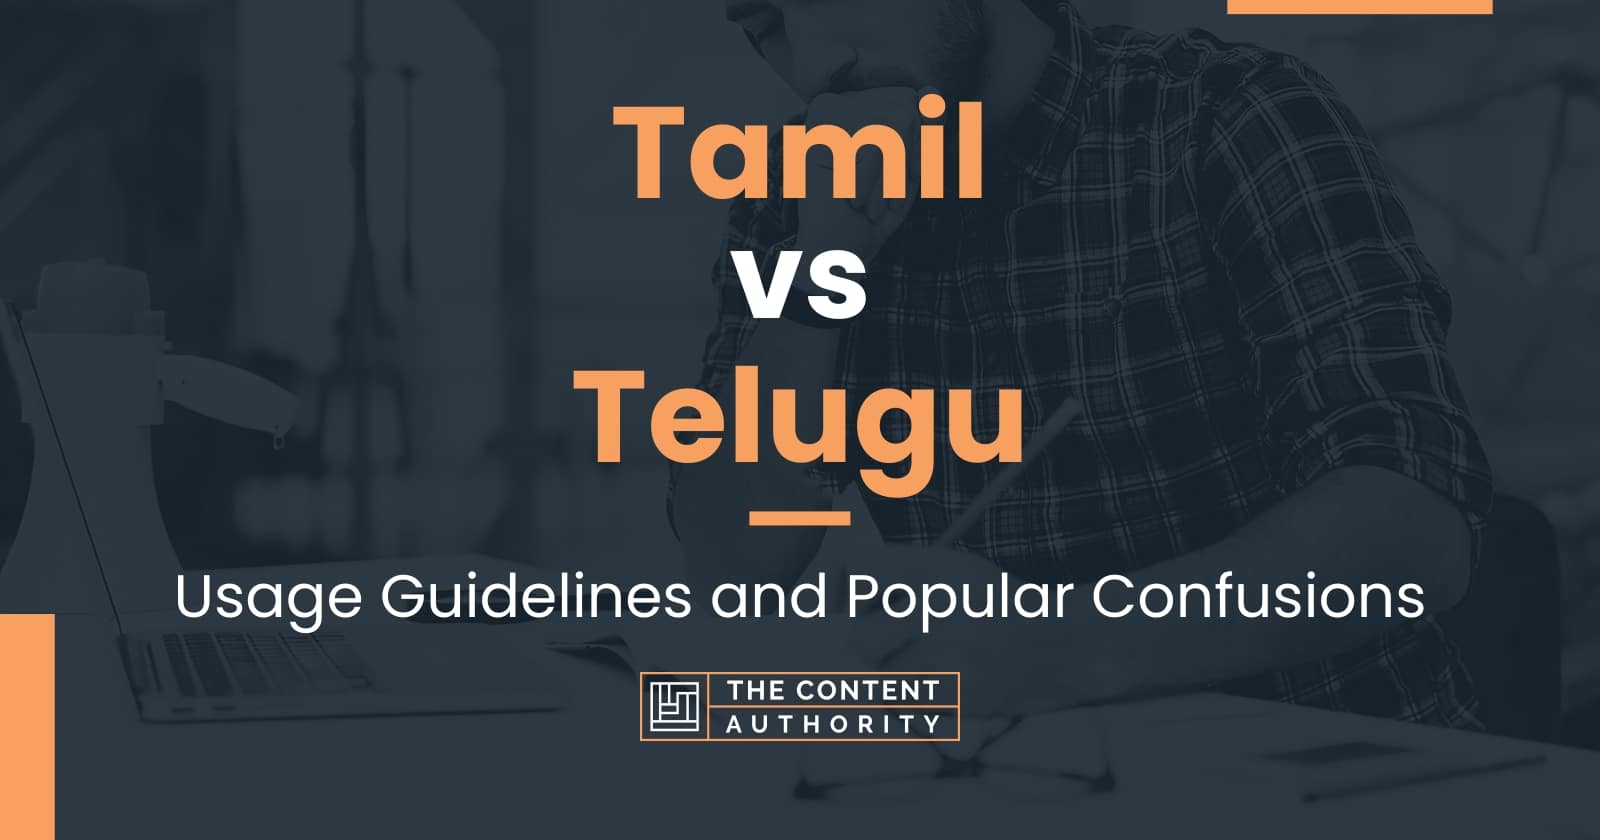 Tamil vs Telugu Usage Guidelines and Popular Confusions